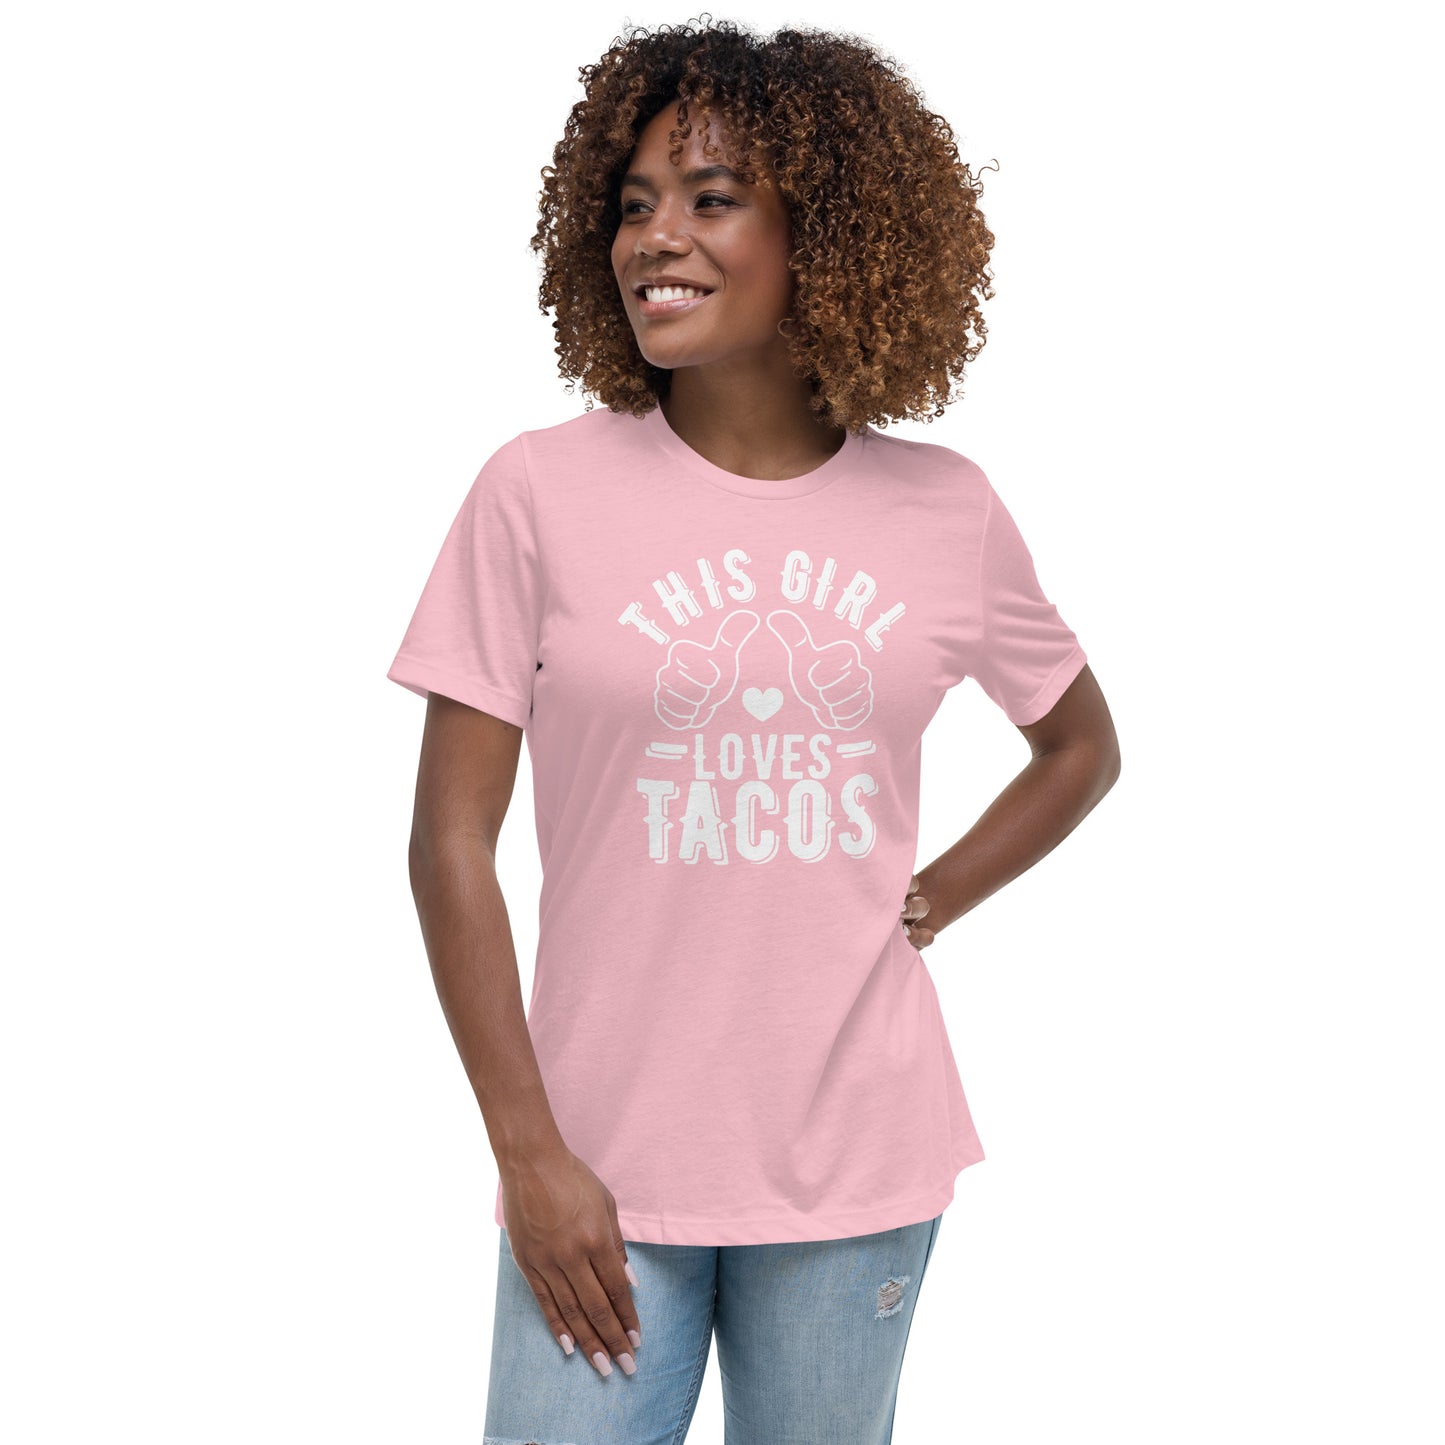 "This Girl Loves Taco's" T-Shirt - Weave Got Gifts - Unique Gifts You Won’t Find Anywhere Else!